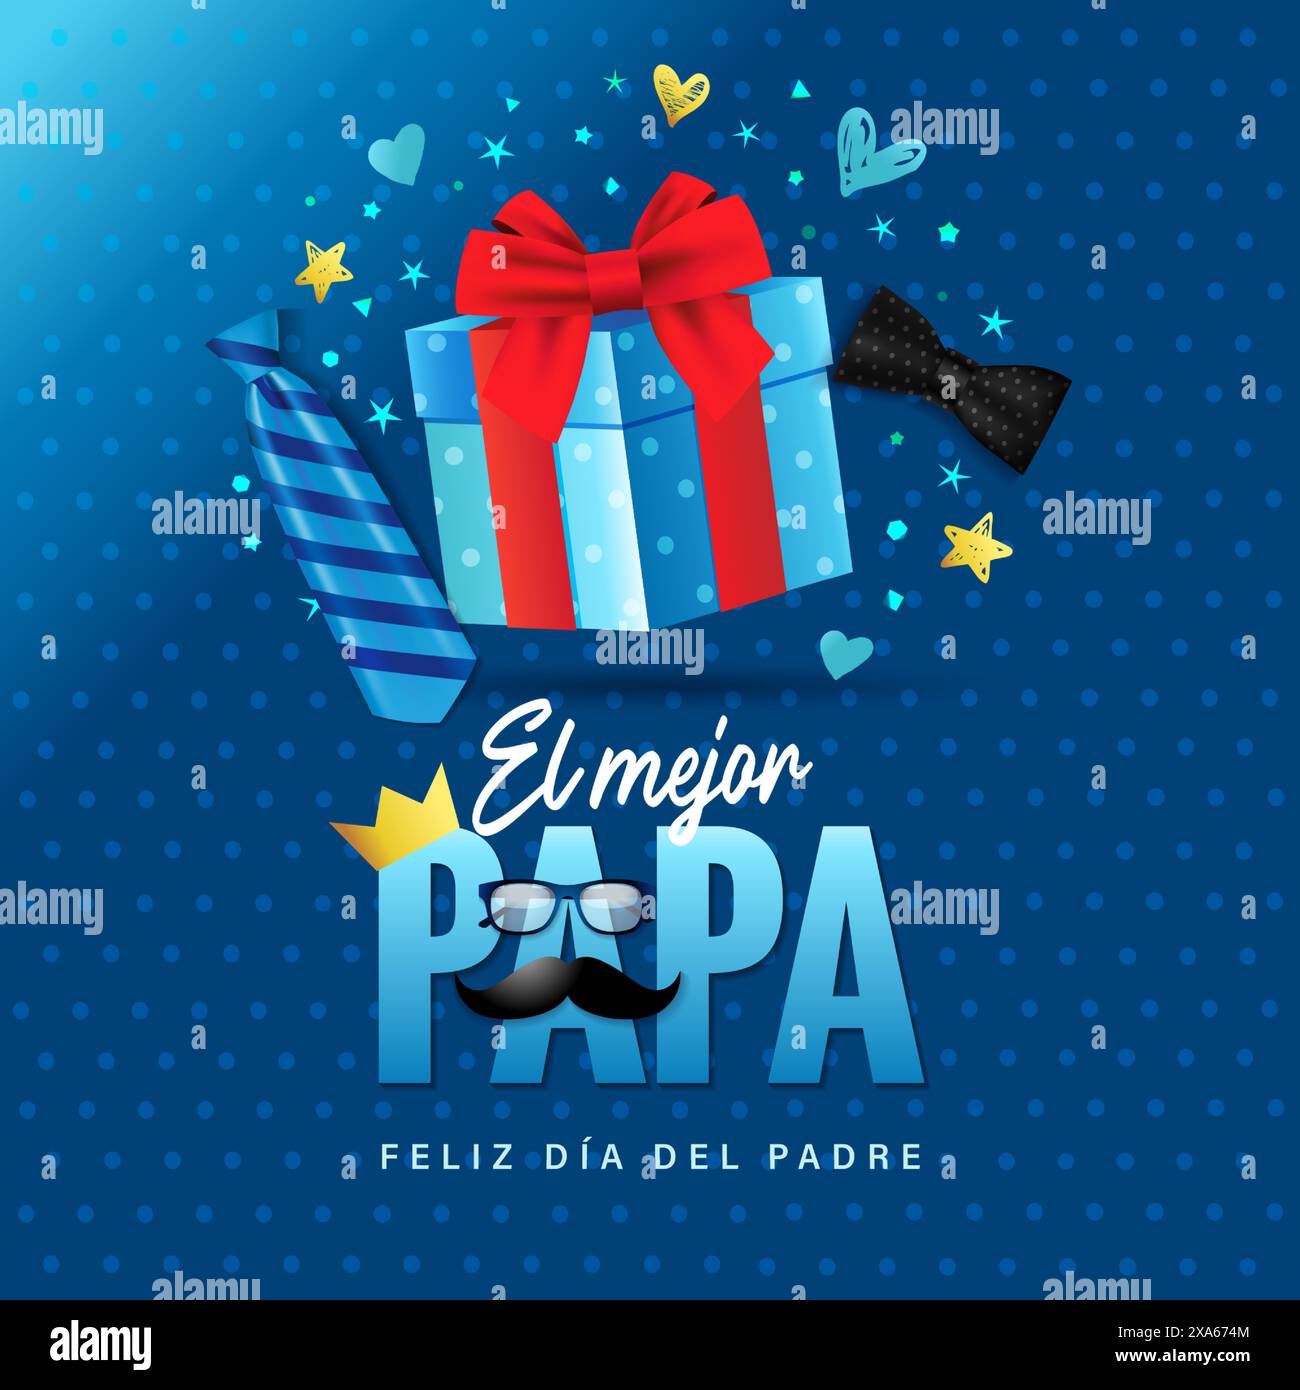 El mejor Papa, Fathers Day web stories post. Translation from spanish - The best Dad, Happy Father's Day. Vector illustration Stock Vector